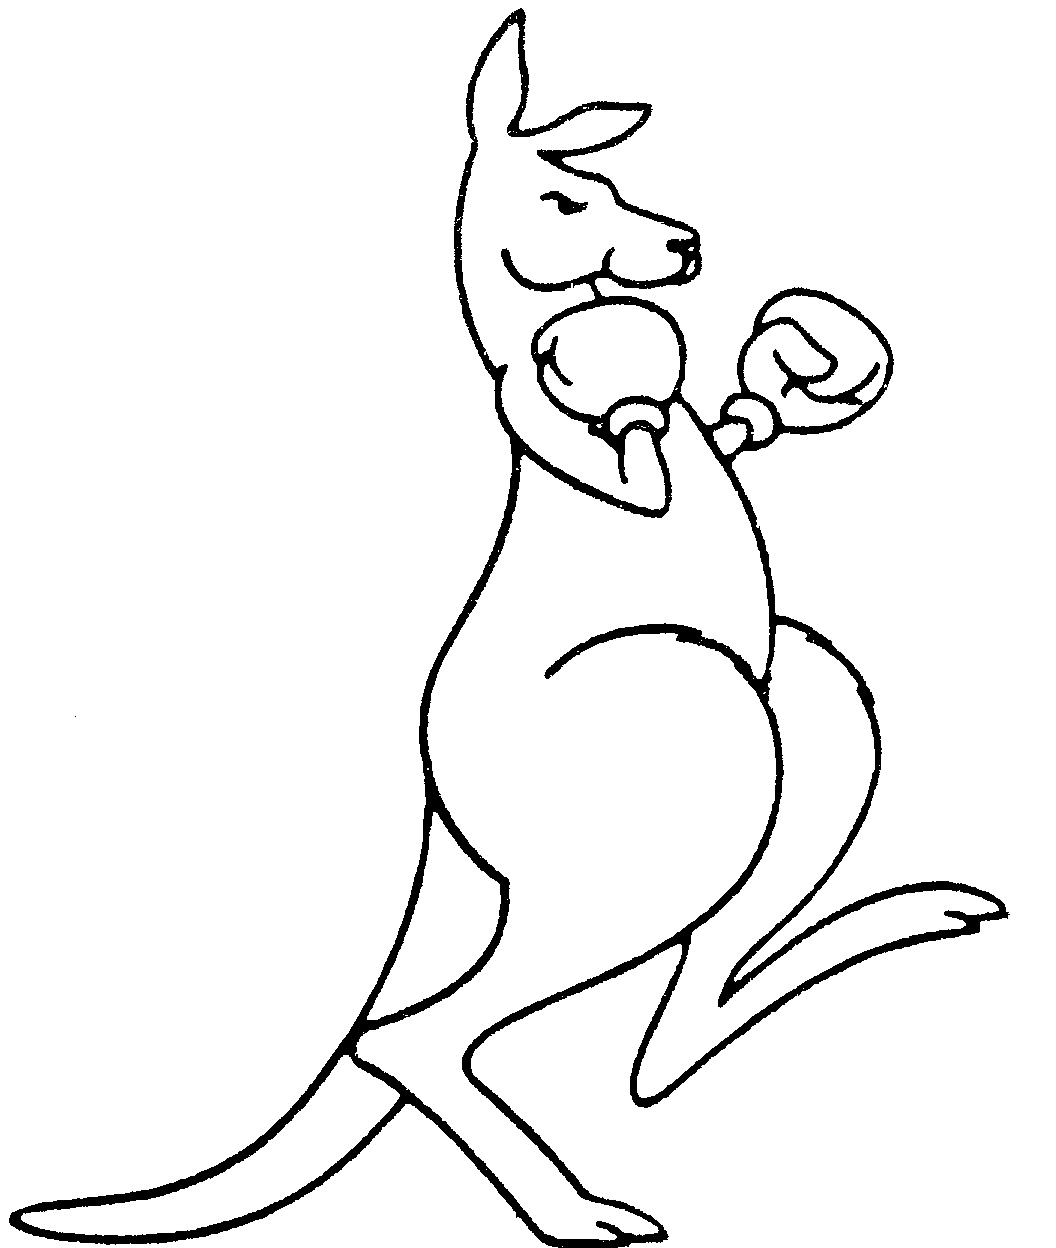 Baby kangaroo coloring pages - Coloring Pages & Pictures - IMAGIXS